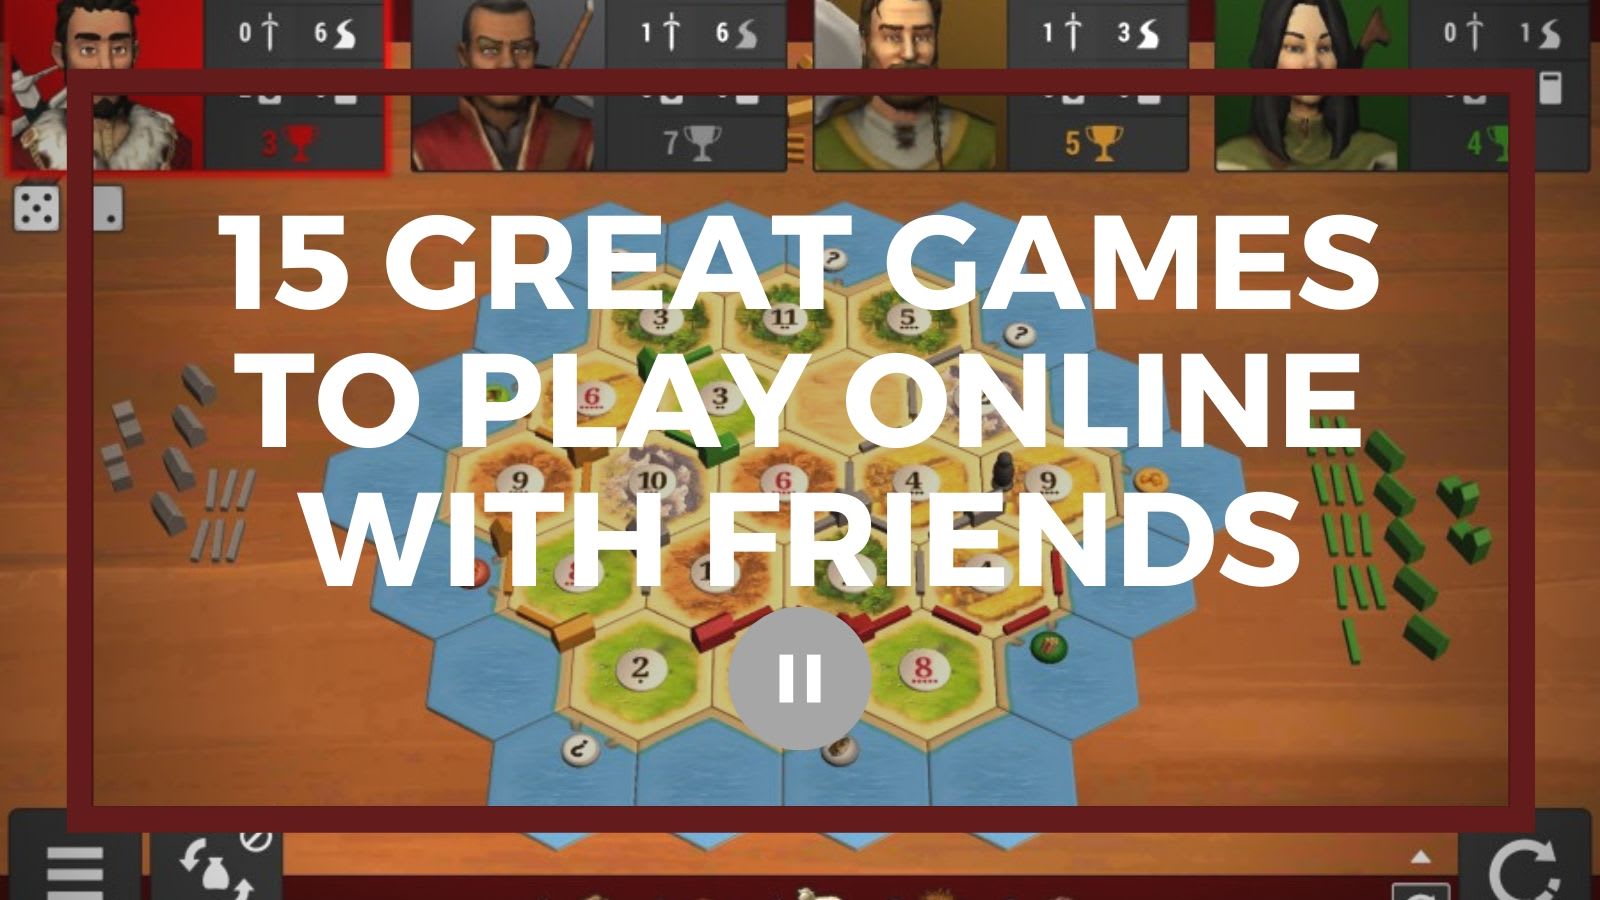 9 great games to play with your friends online